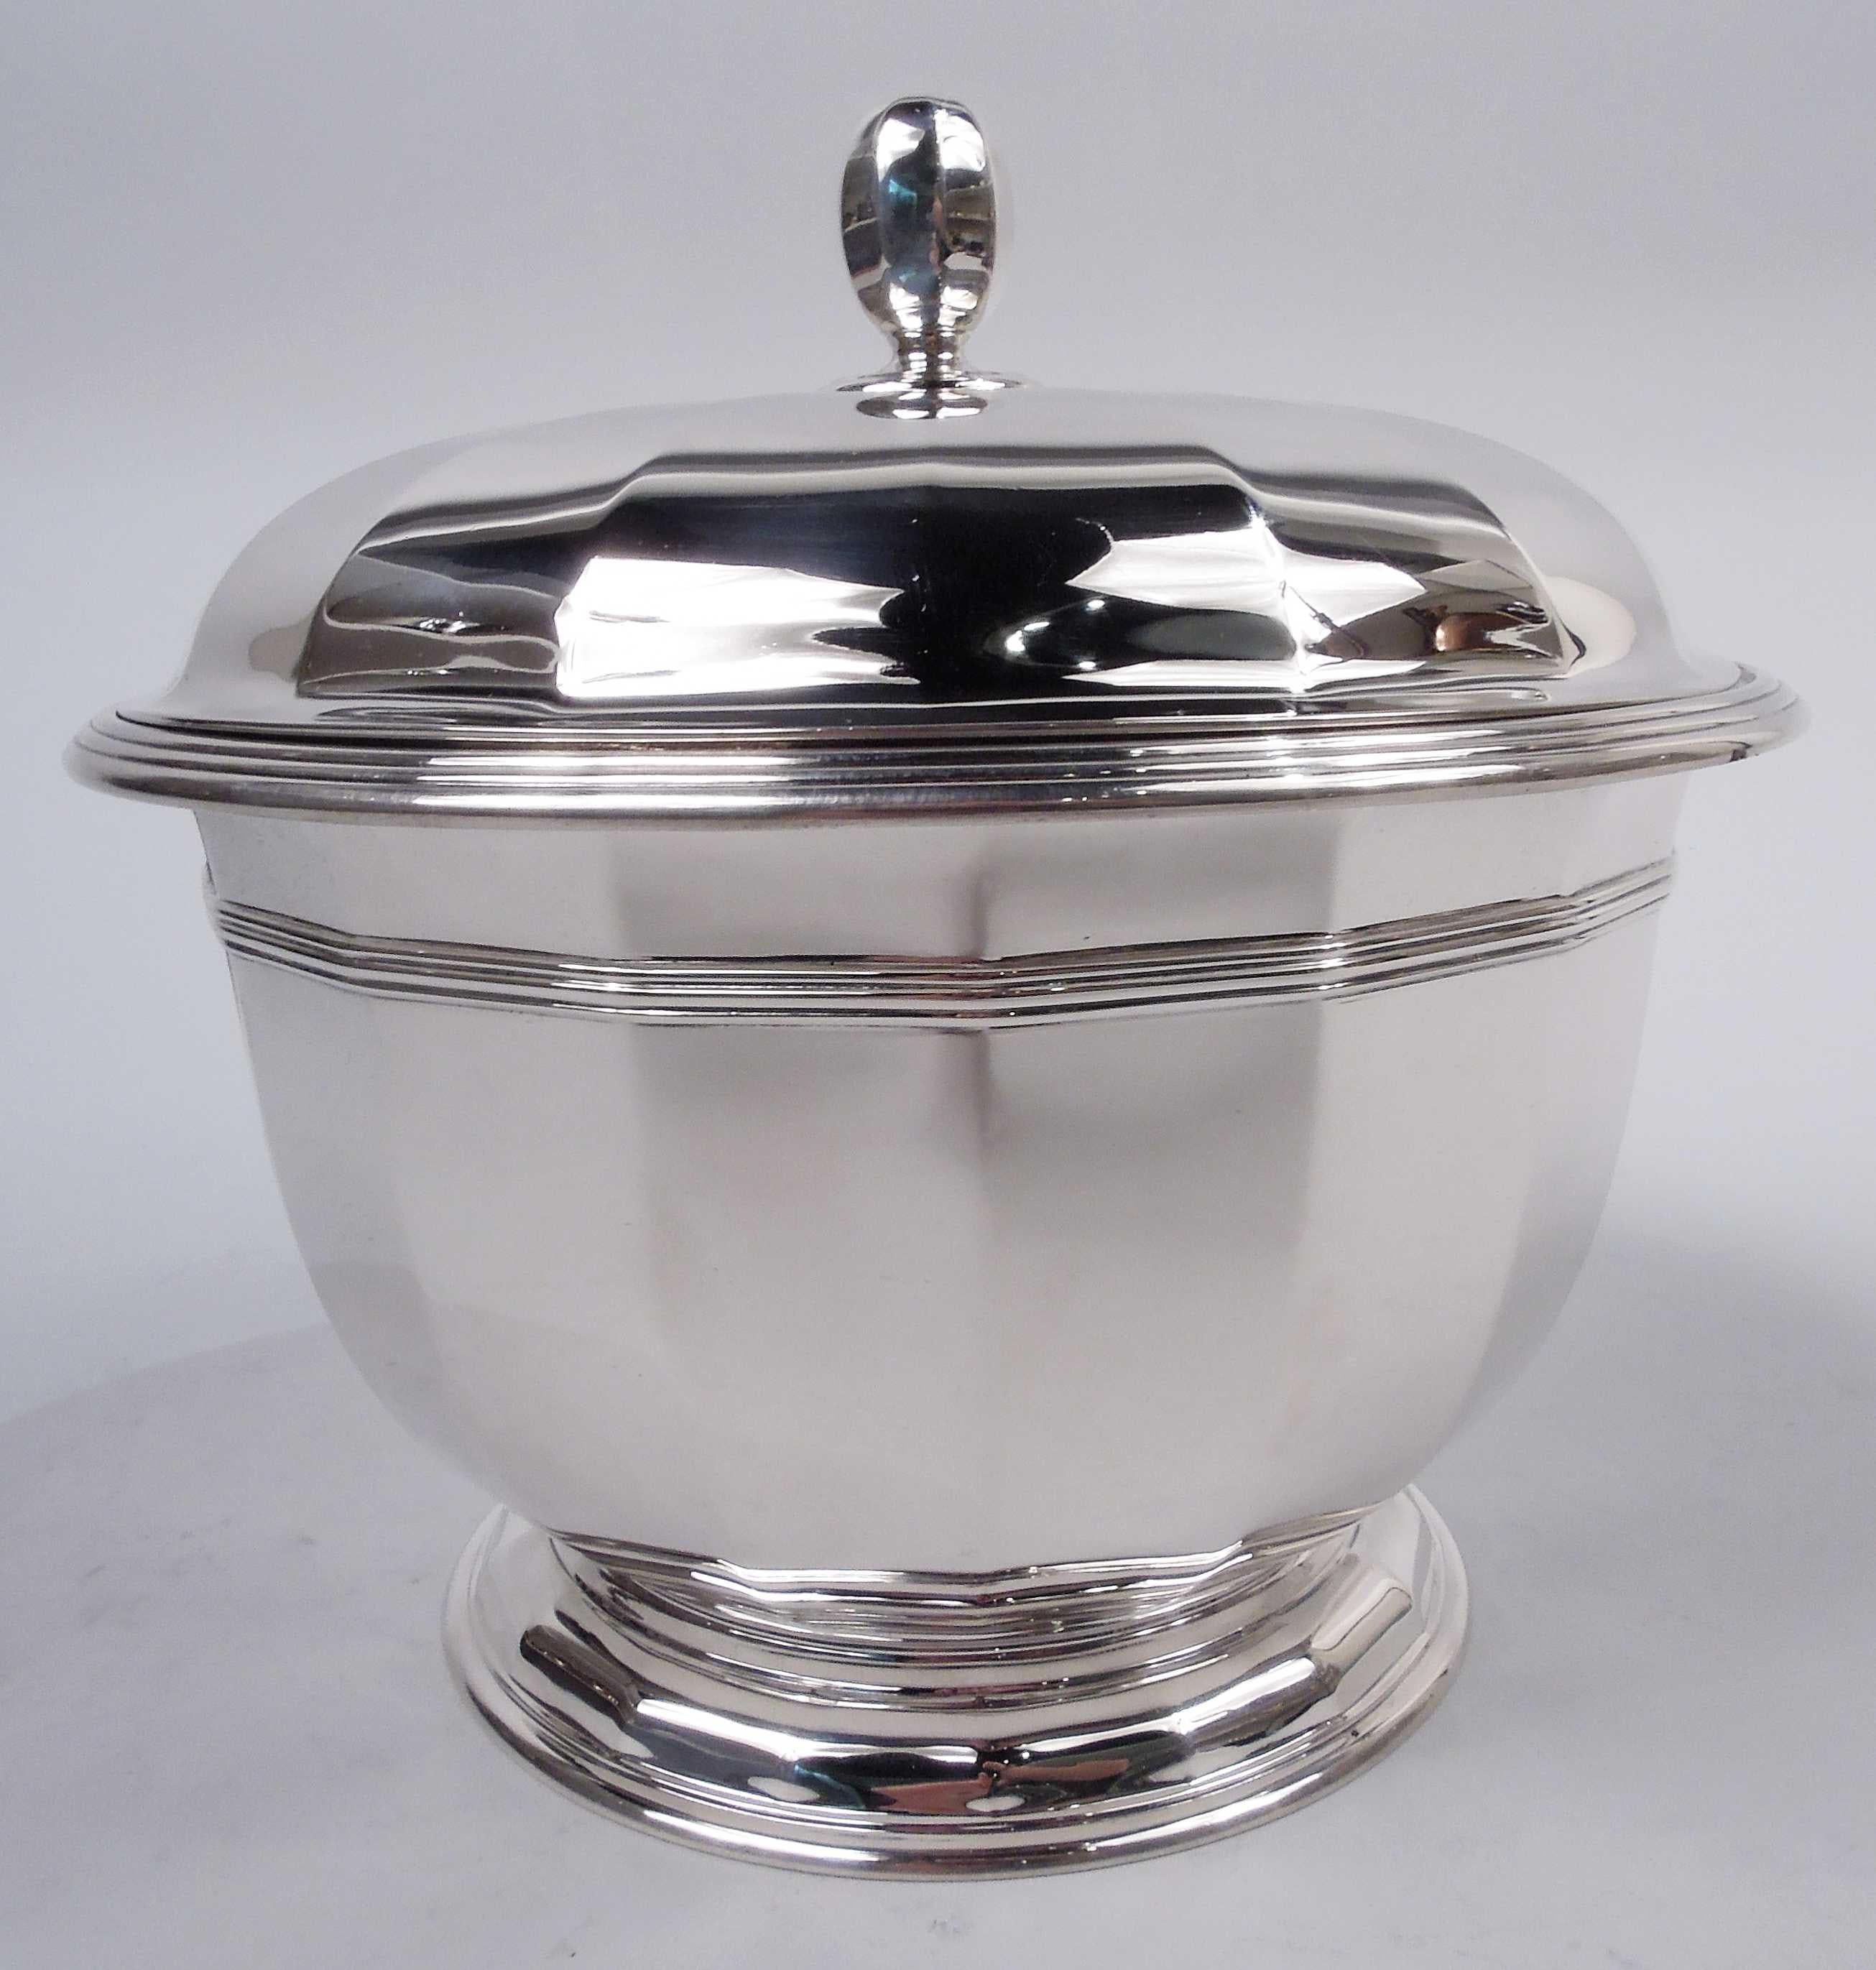 Art Deco sterling silver ice bucket. Made by Tiffany & Co. in New York, ca 1917. Girdled urn on raised foot. Cover raised with ovoid finial. Faceted and reeded. Snazzy with nice shimmer. Fully marked including maker’s stamp, pattern no. 19346 (first